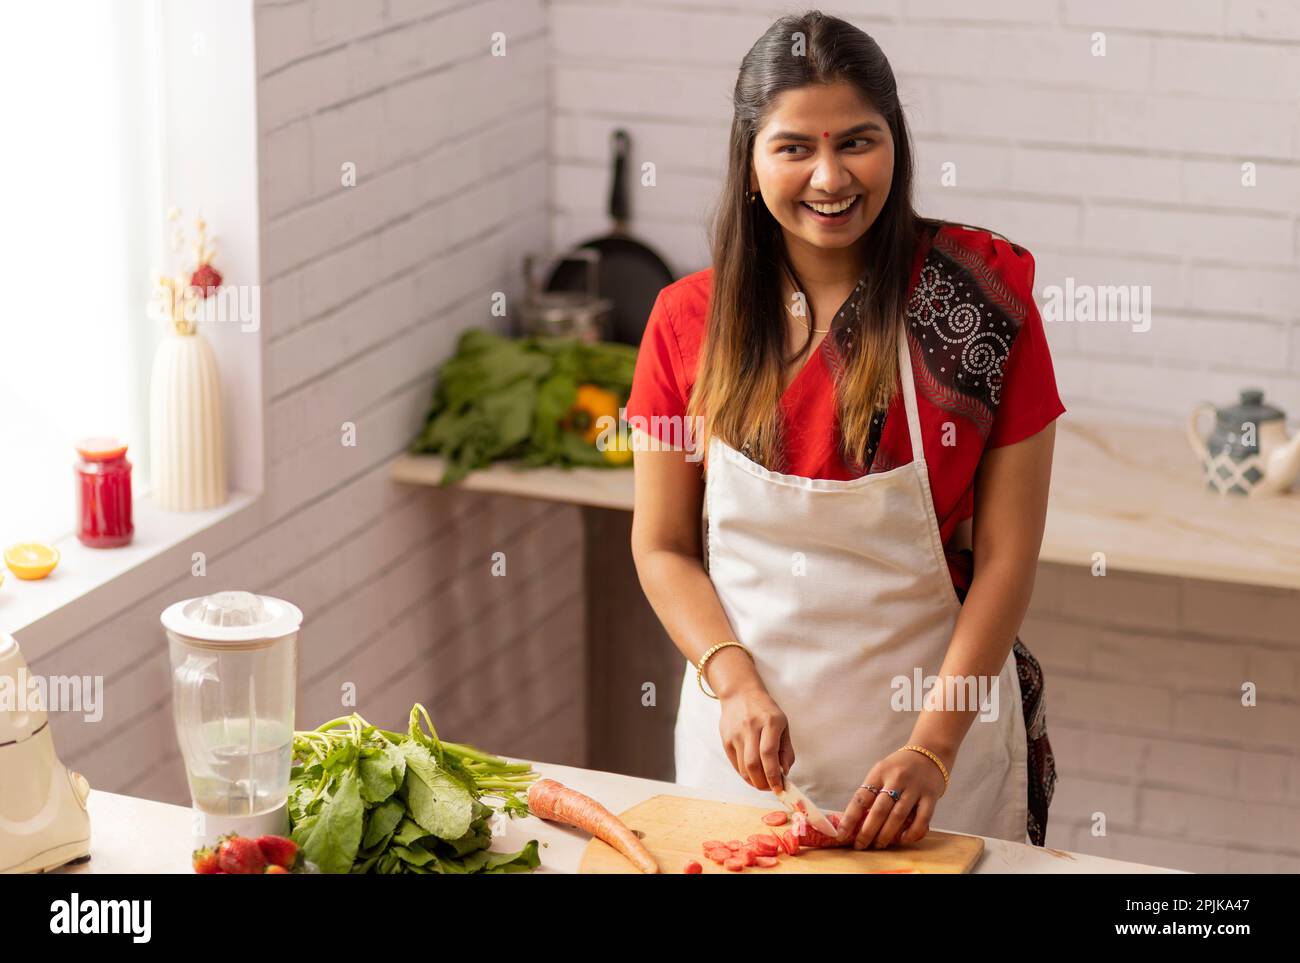 Smiling woman chopping vegetables in kitchen Stock Photo